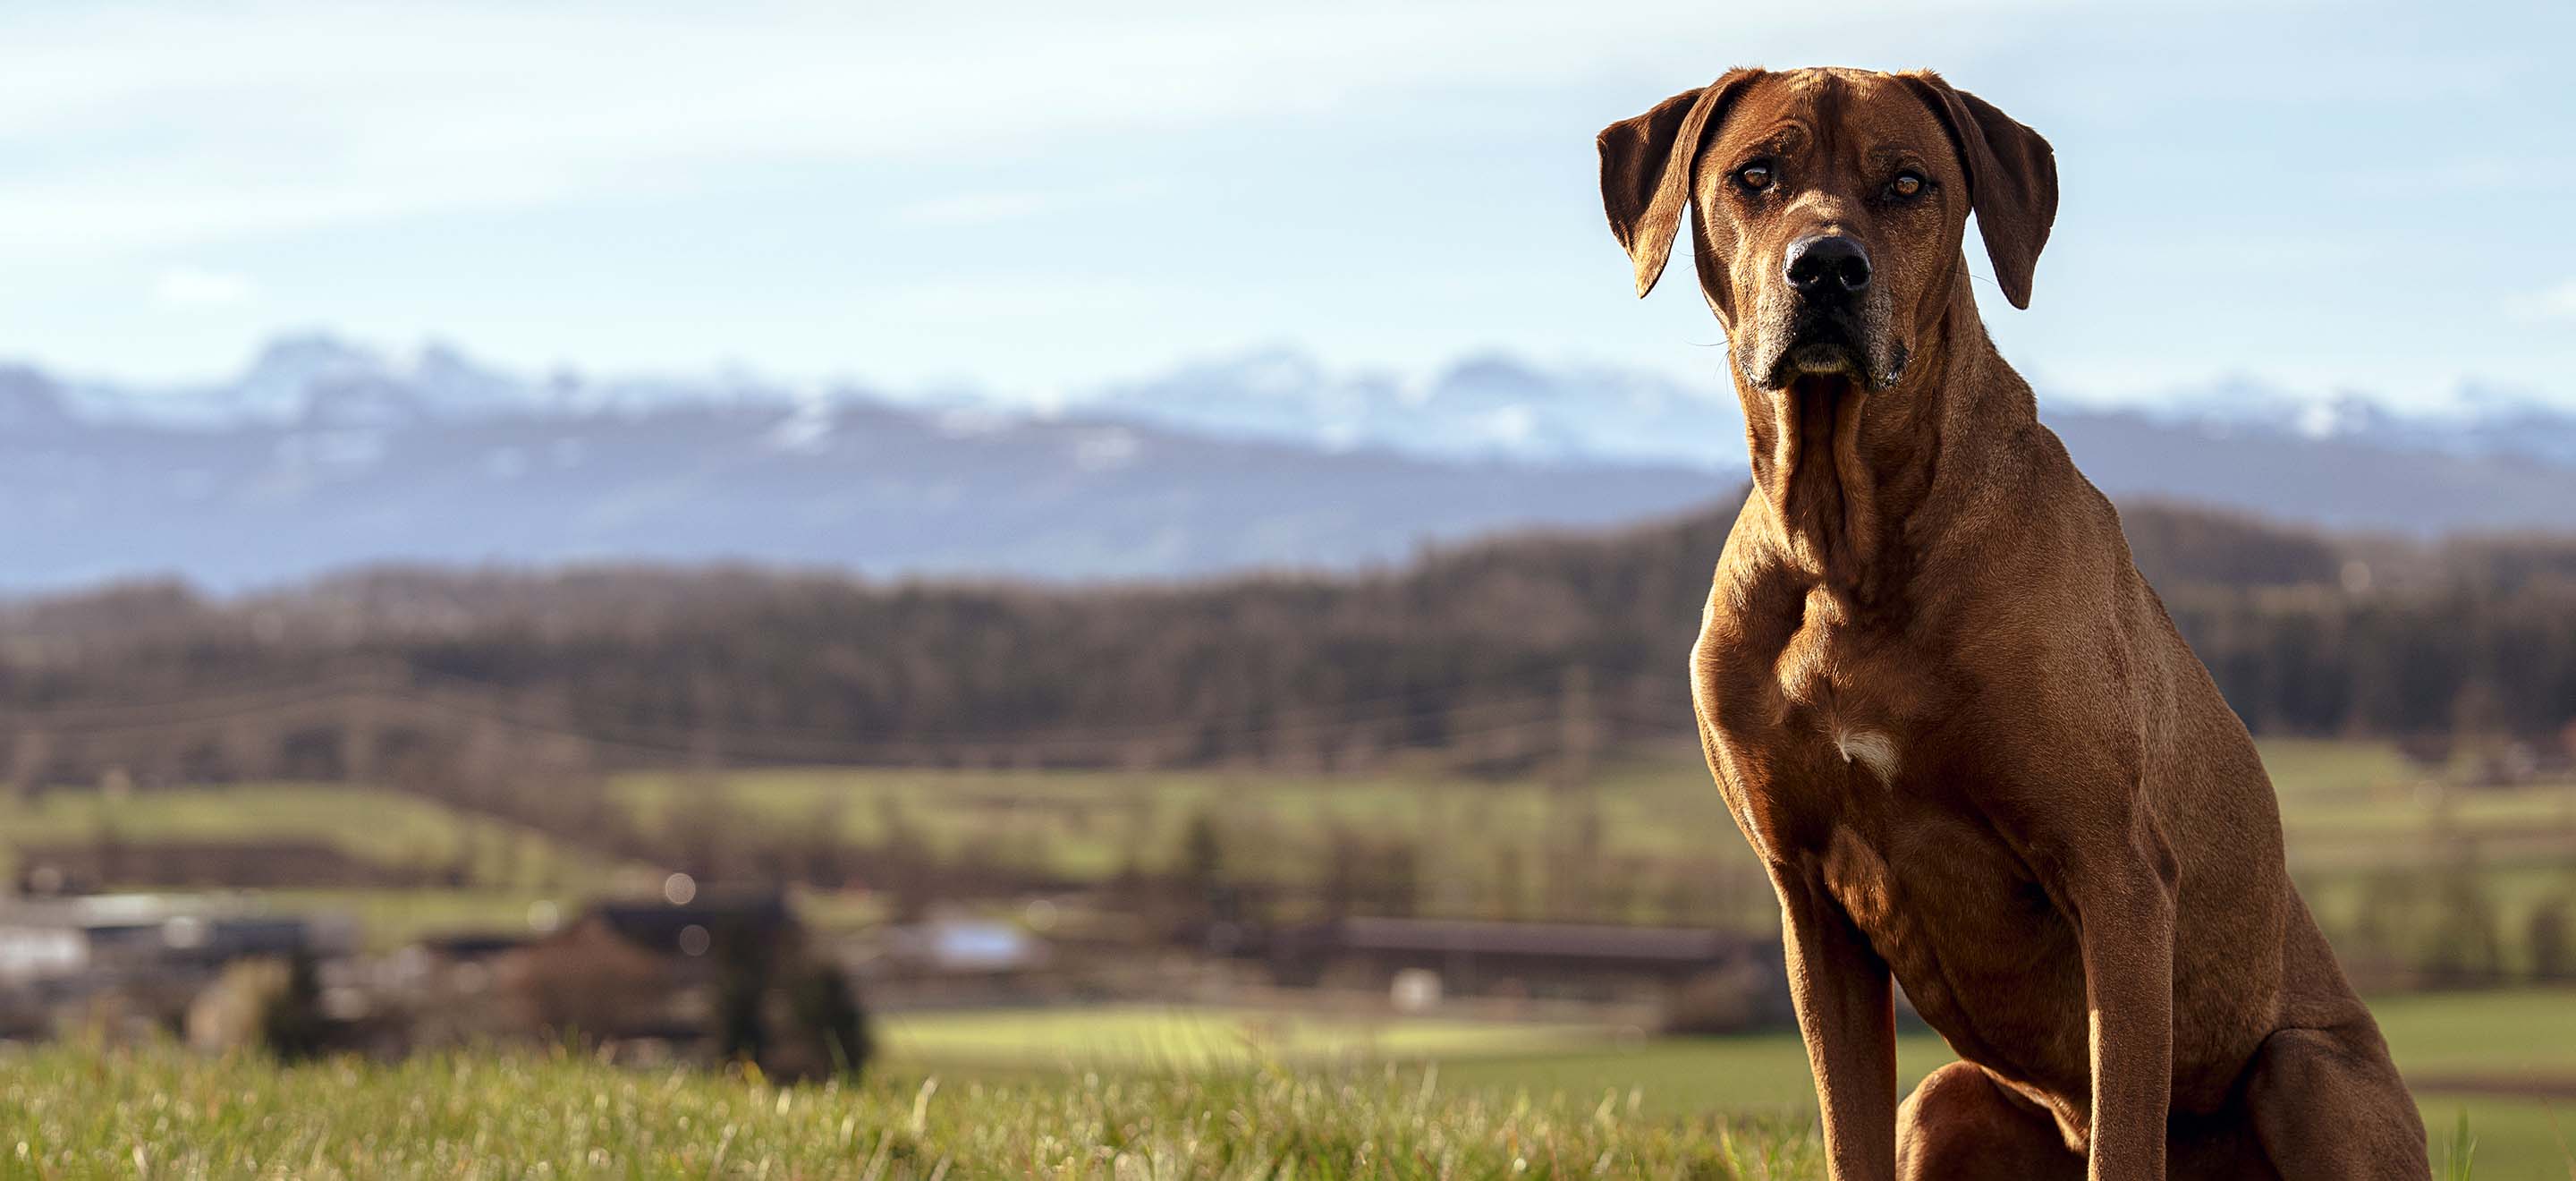 A Rhodesian Ridgeback dog standing in front of a mountain scene image